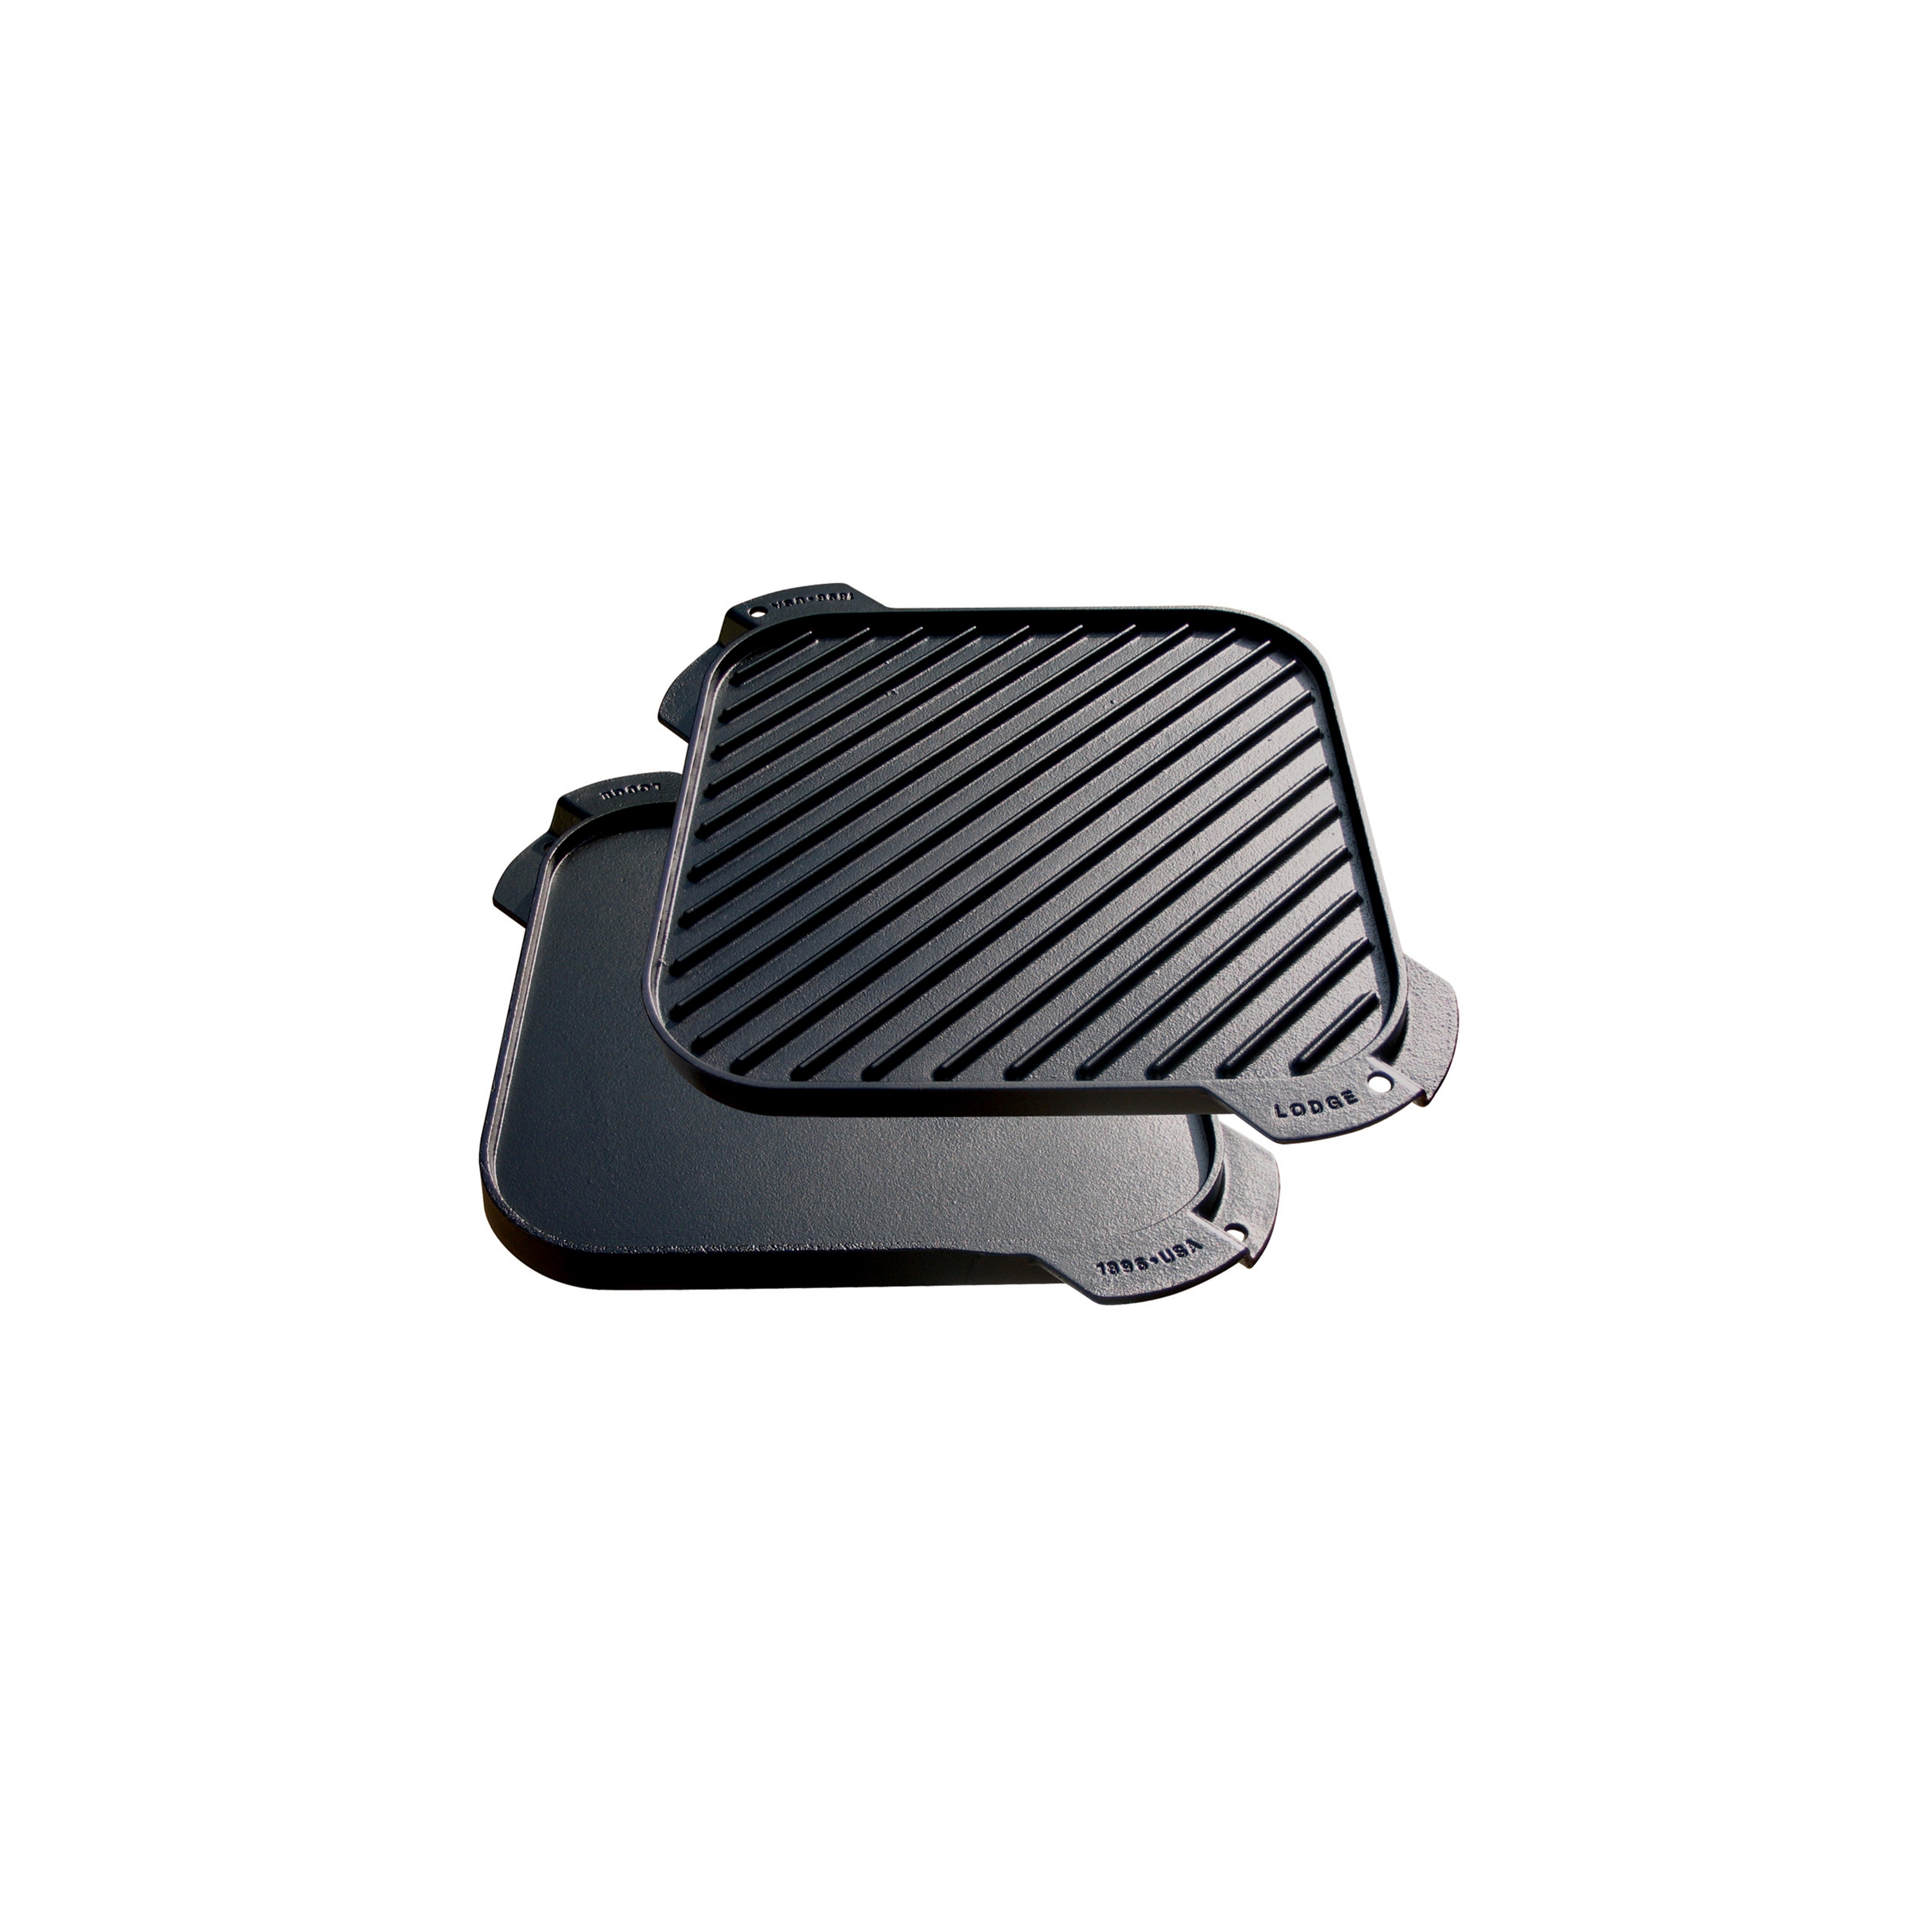 Lodge LSRG3 Reversible Grill/Griddle, 10.5 Cast Iron, Square